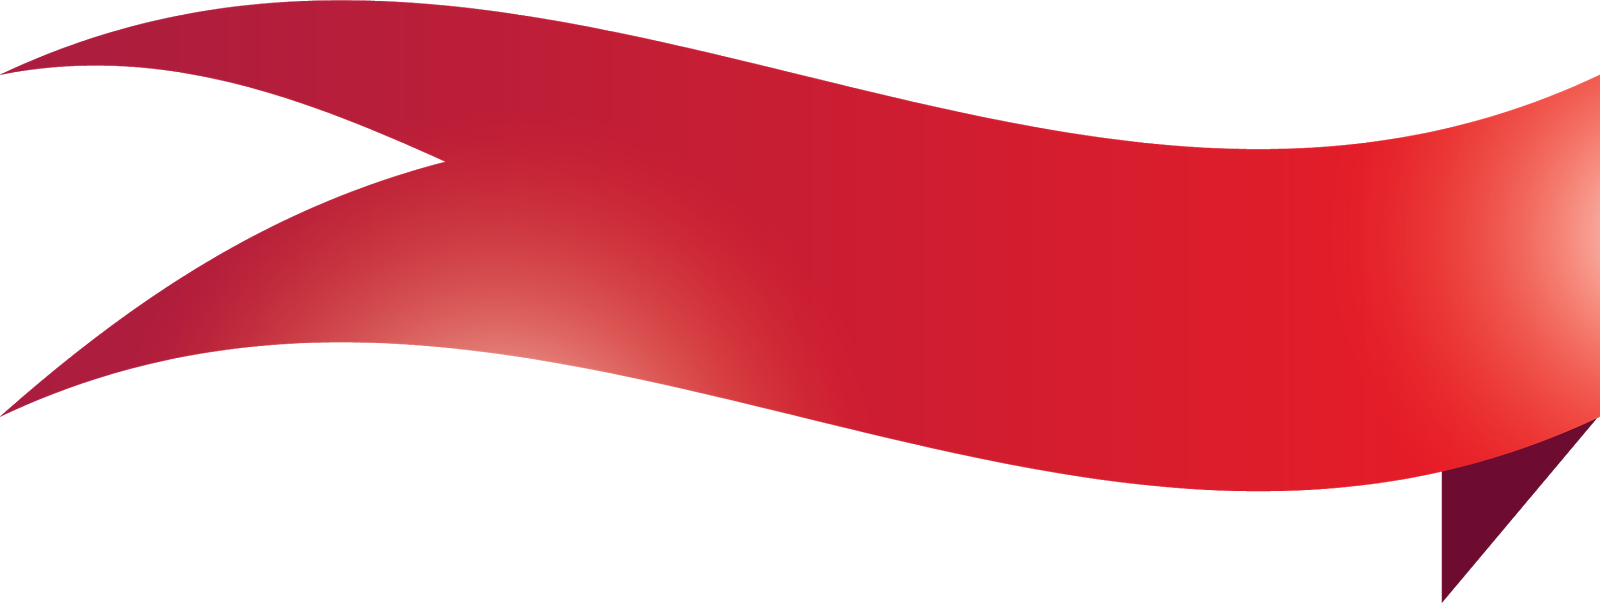 Red Wavy Banner Graphic PNG